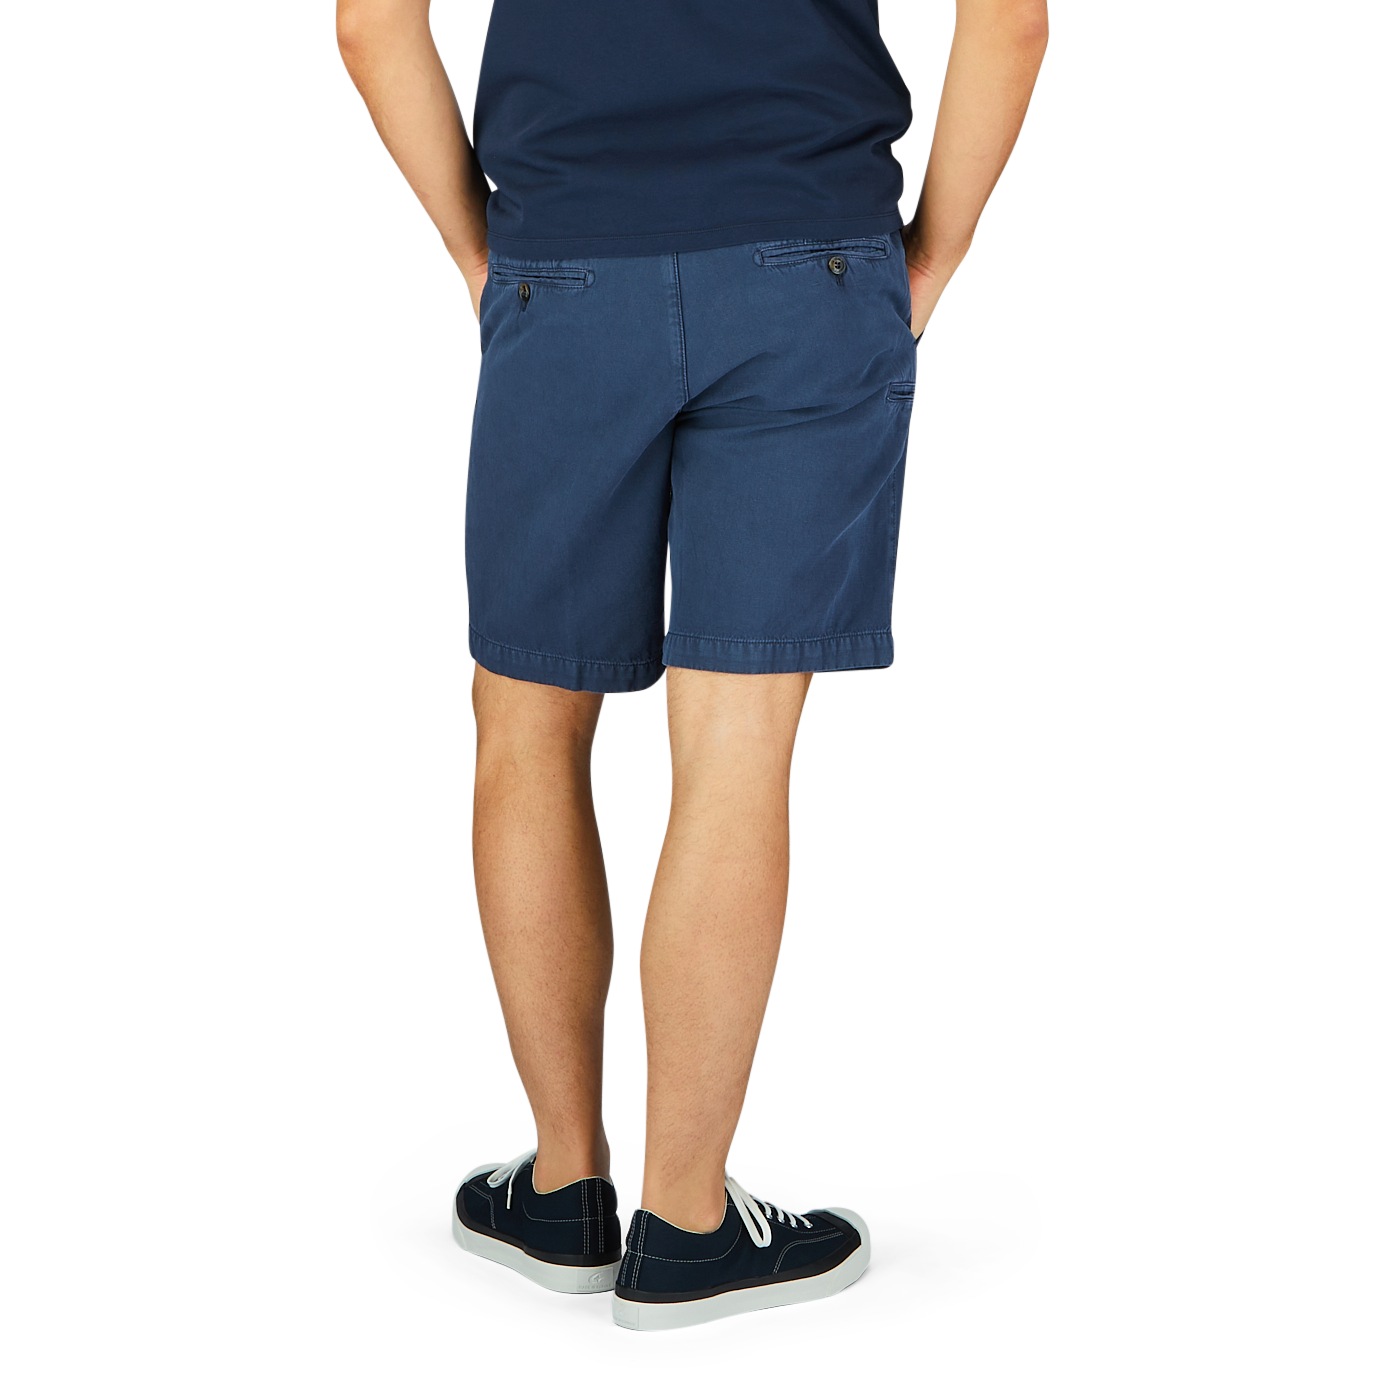 Person standing with hands in pockets, wearing Briglia navy blue cotton linen pleated shorts with an adjustable waistband and sneakers.